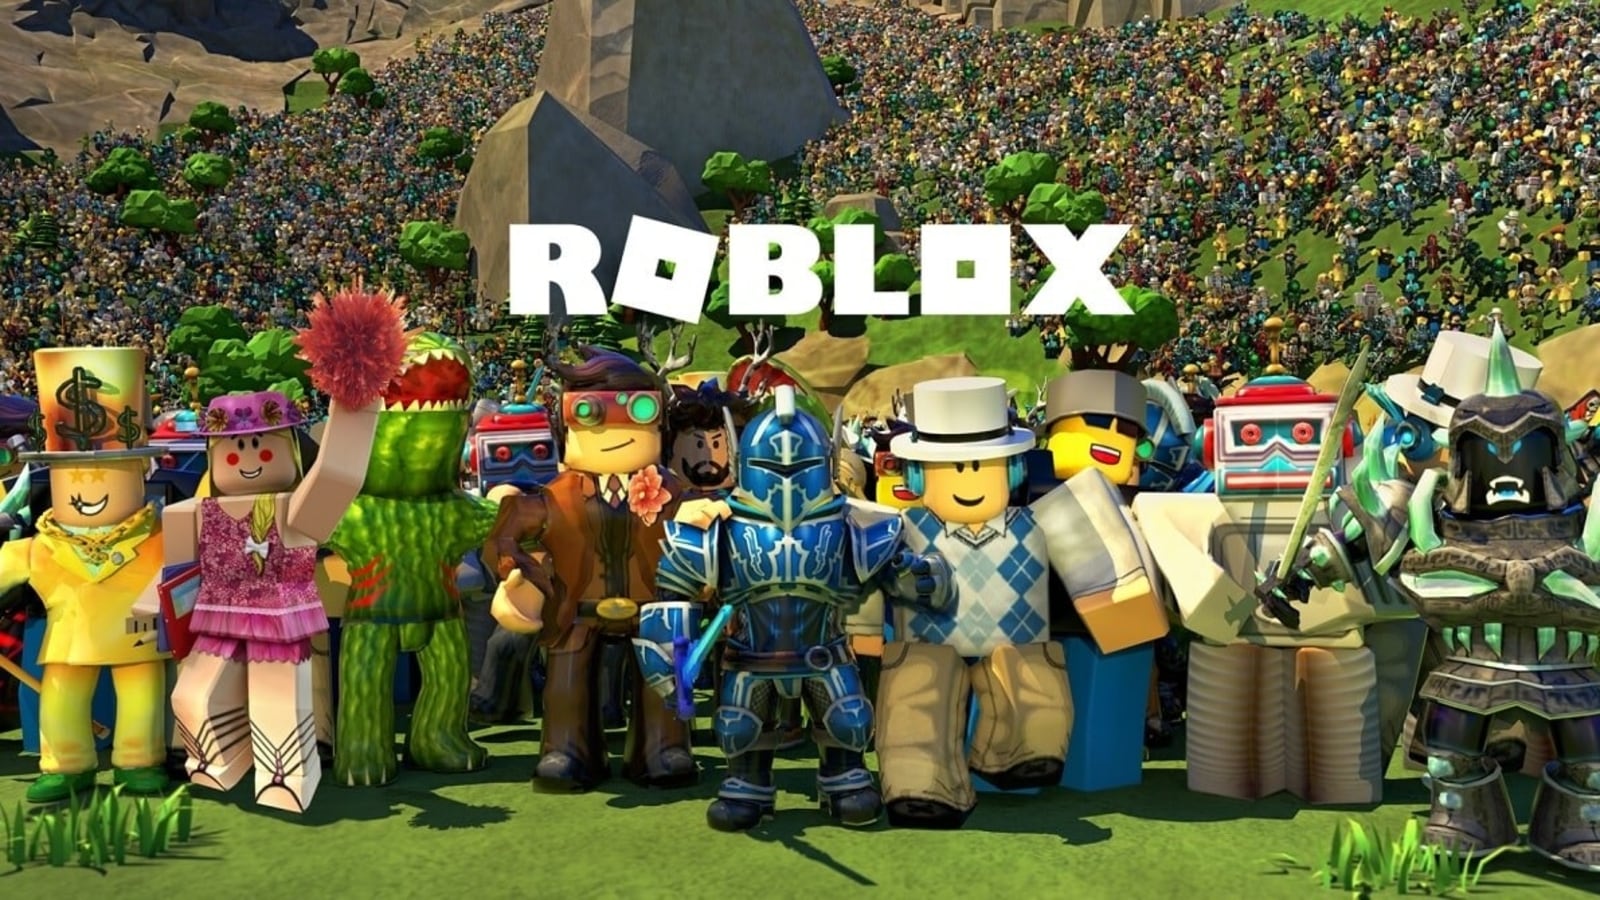 Is Roblox Safe for Kids? Dangers & How to Protect Them